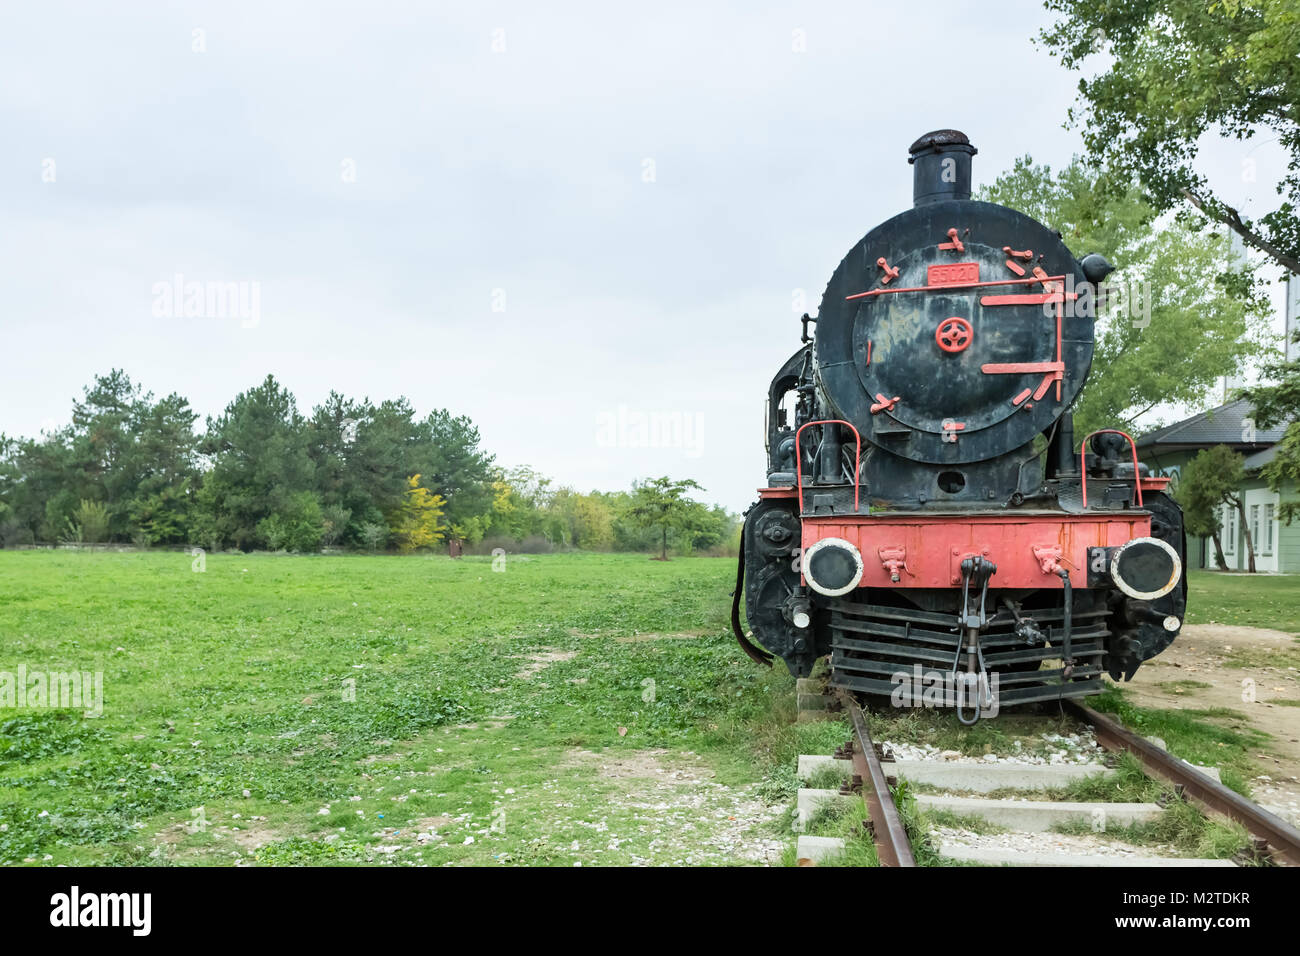 Steam power train from Orient Express era at the old railway station in Edirne,Turkey.17 October 2015 Stock Photo